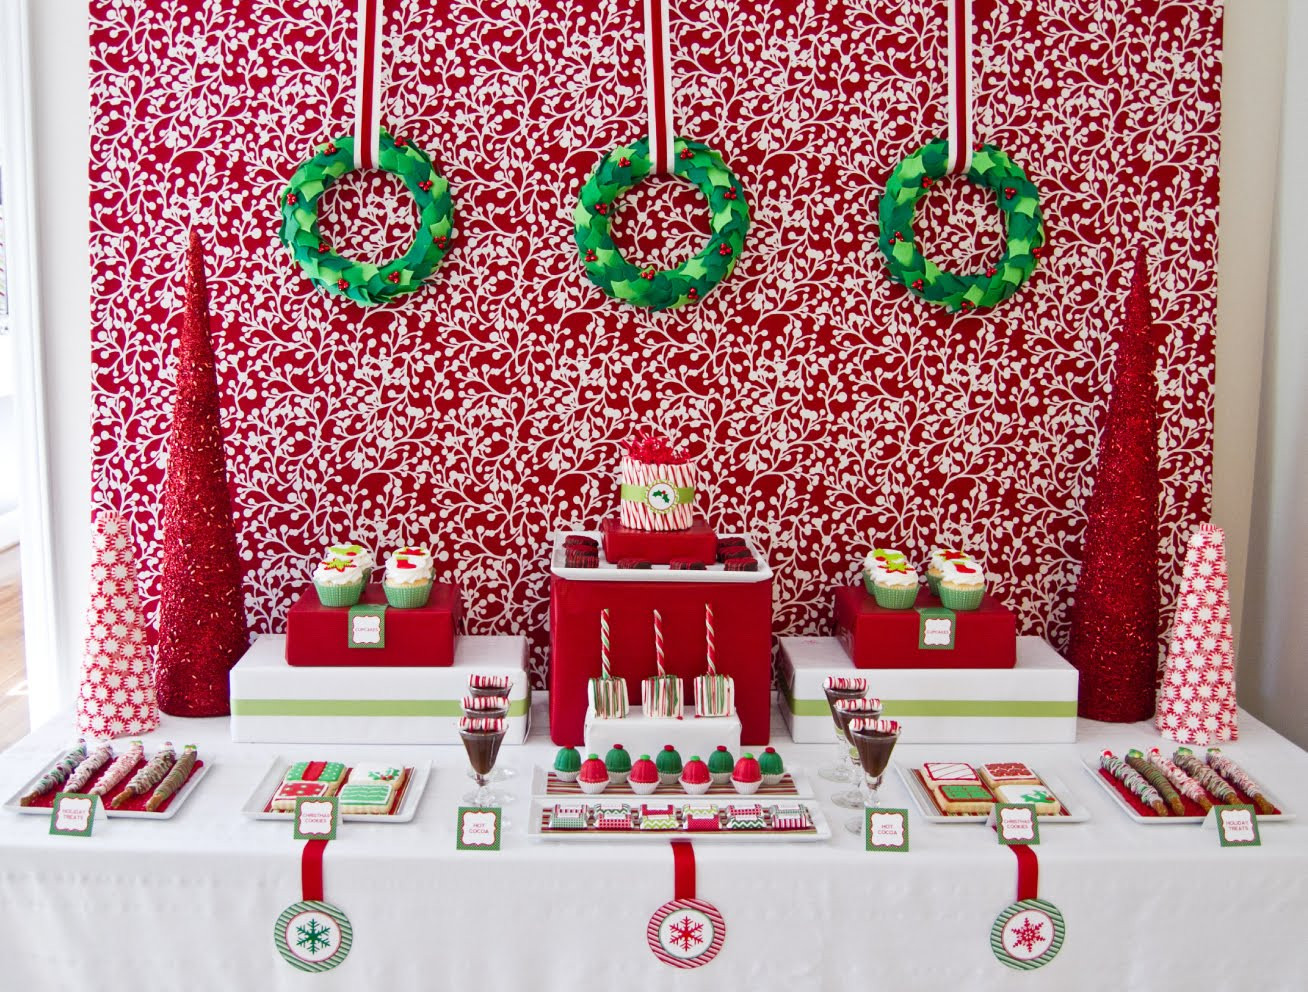 Holiday Party Decorating Ideas
 5 Christmas Table Decorations